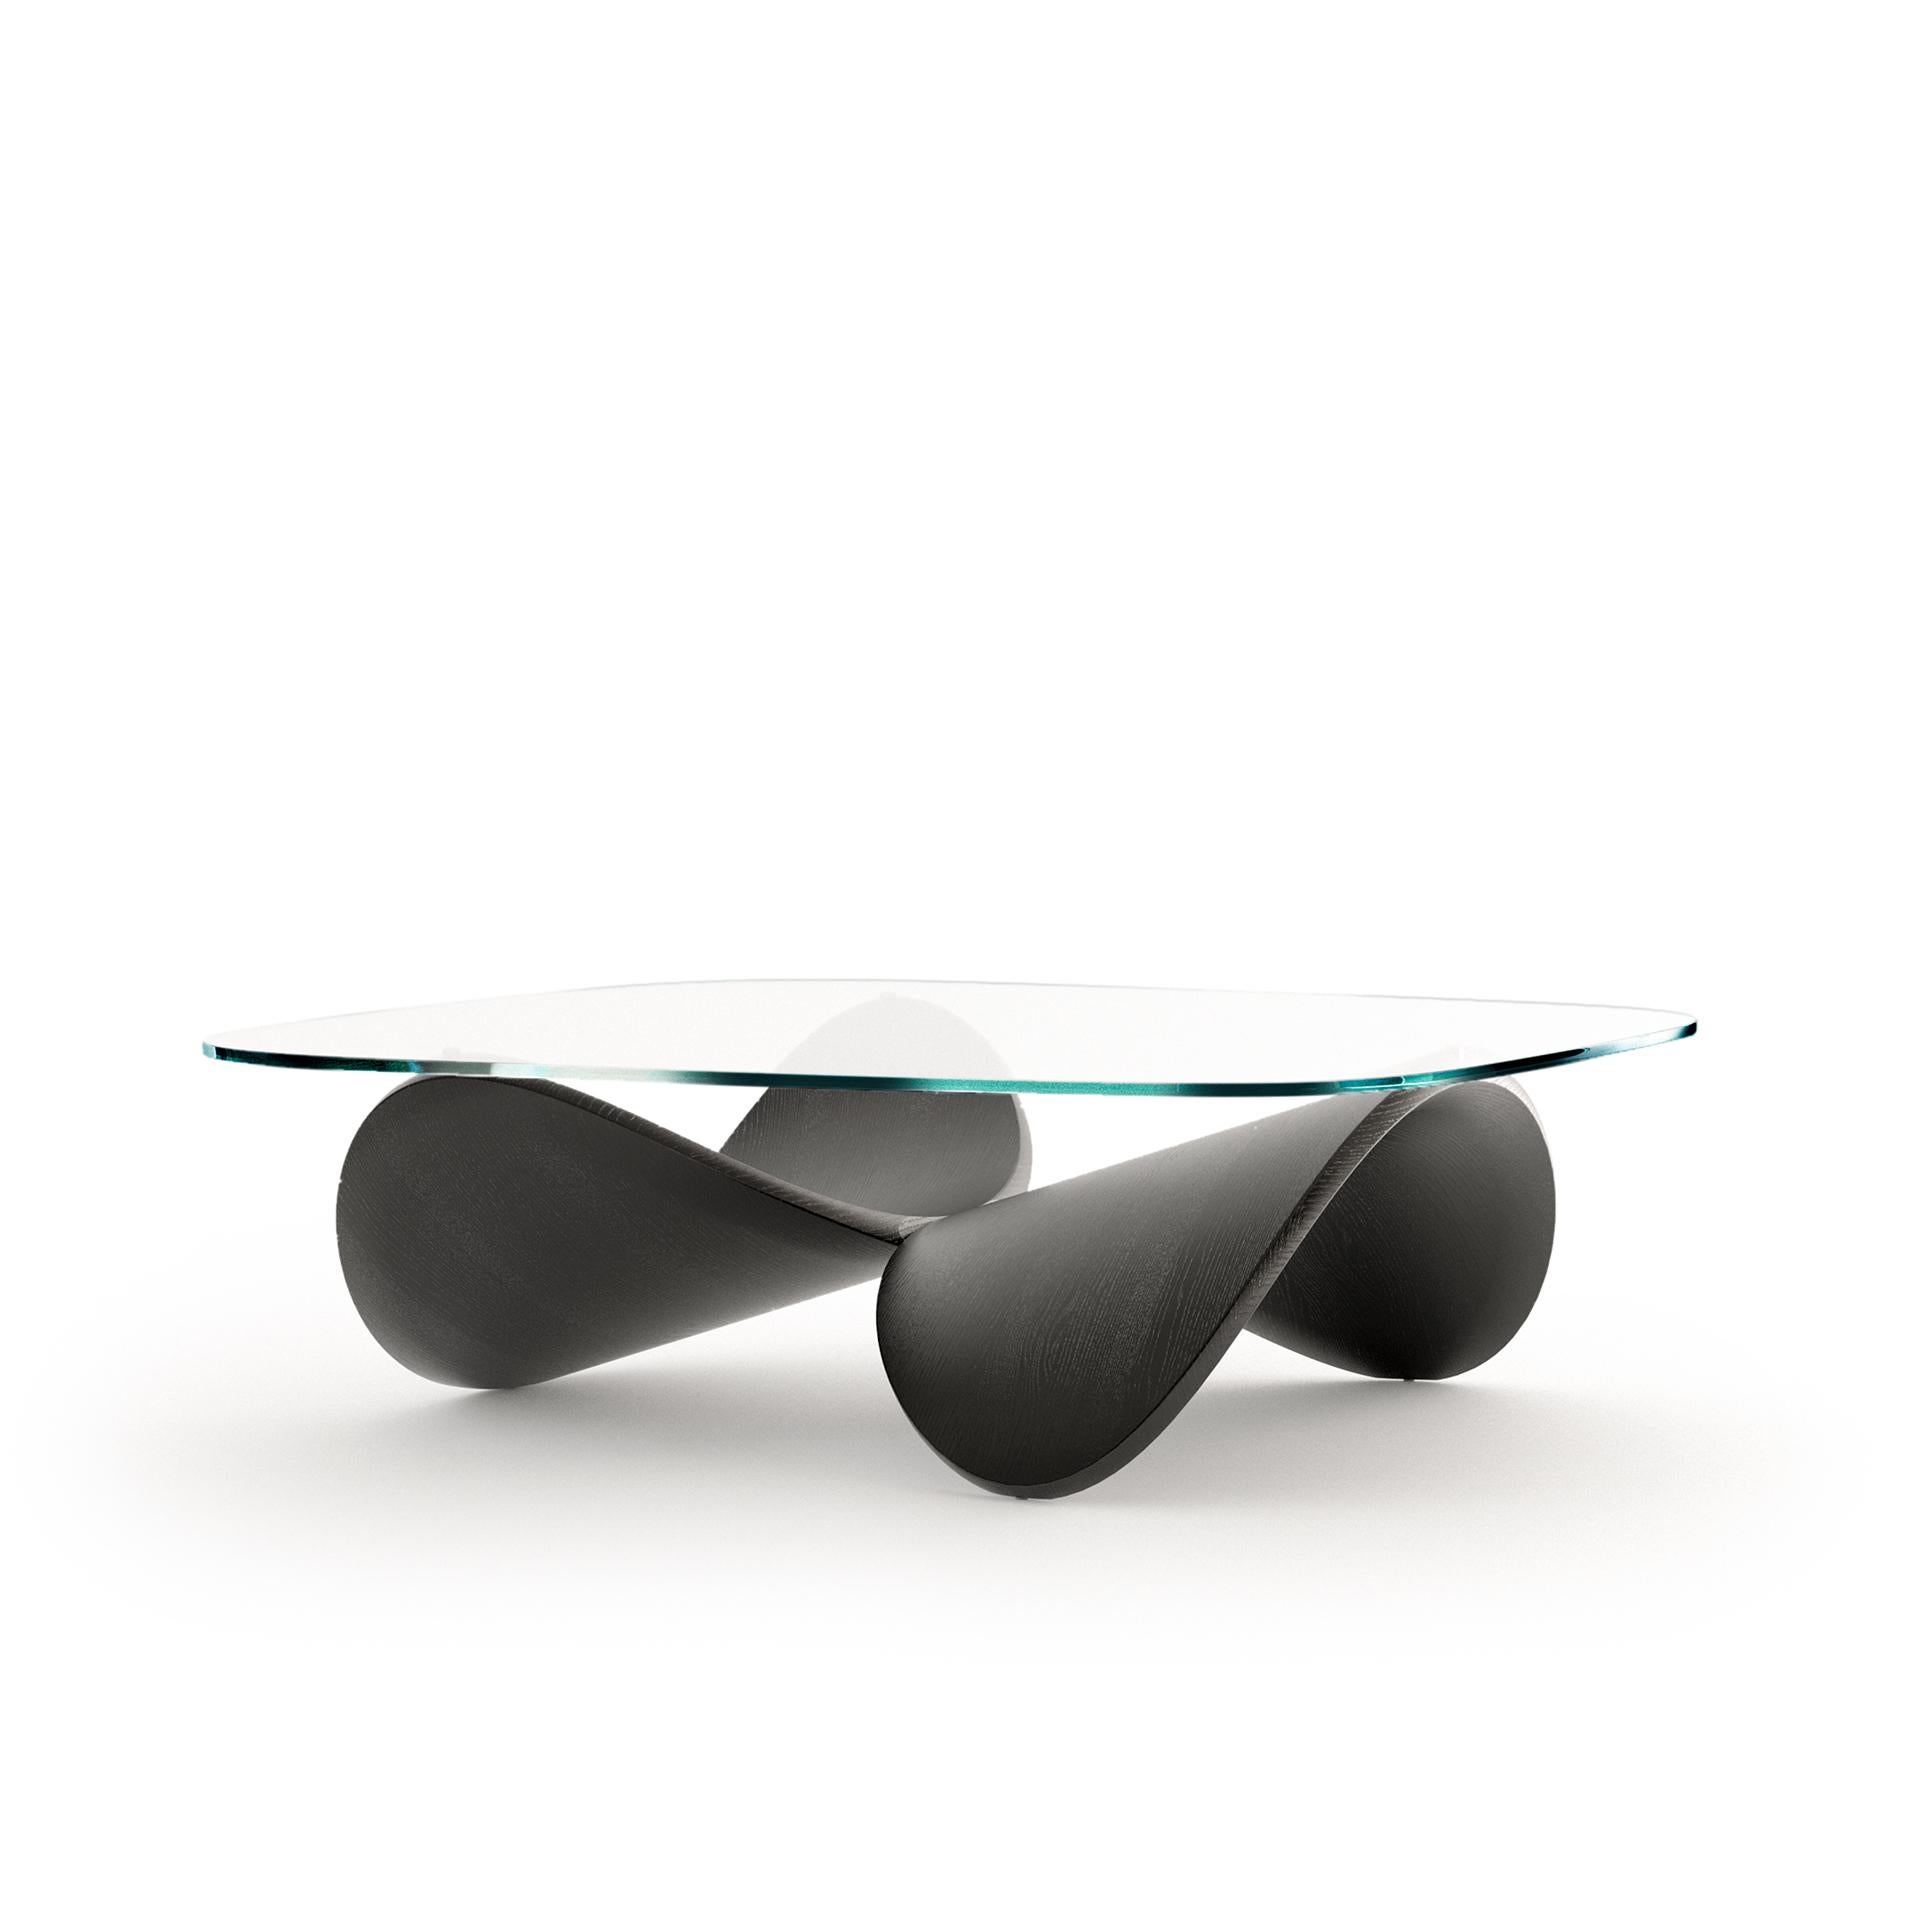 A coffee table made for living spaces that are looking to express uniqueness and a distinctive character. As a piece it is both furniture and sculpture. Once in a room, it expands the spacial quality of the interior by offering new perspectives and